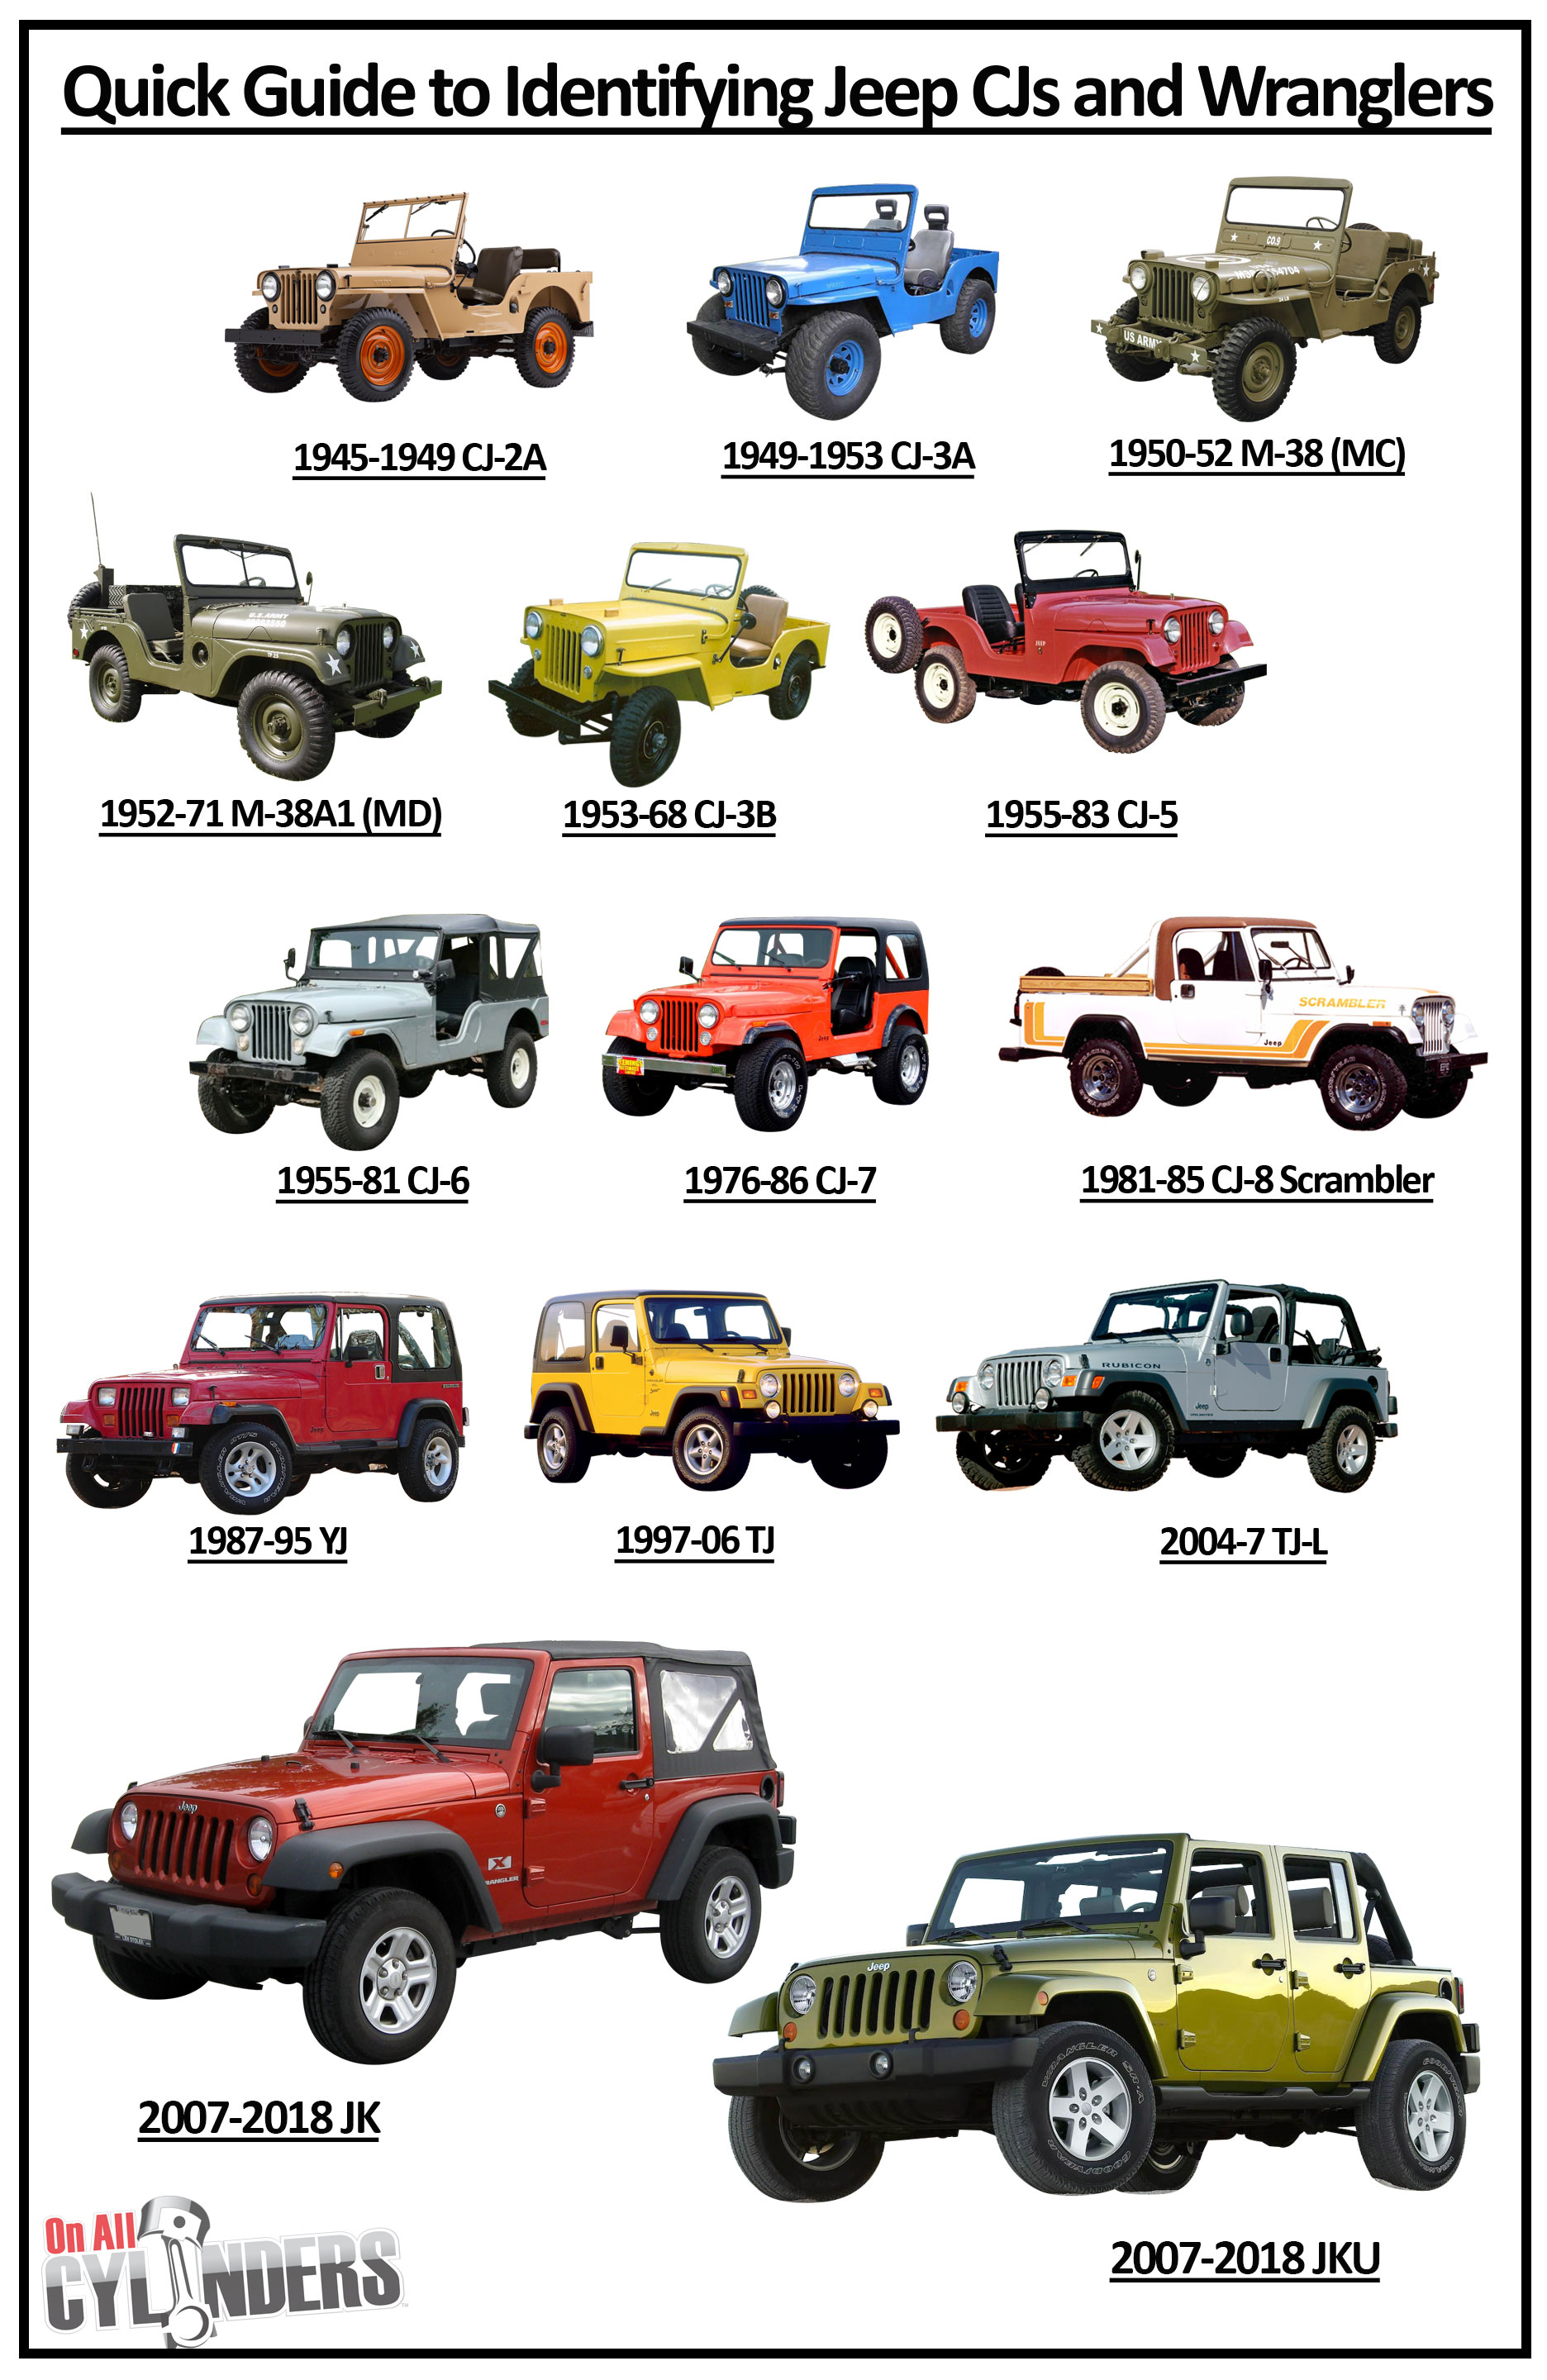 A Visual Guide to Identifying Jeep CJs and 1987-2018 Wranglers